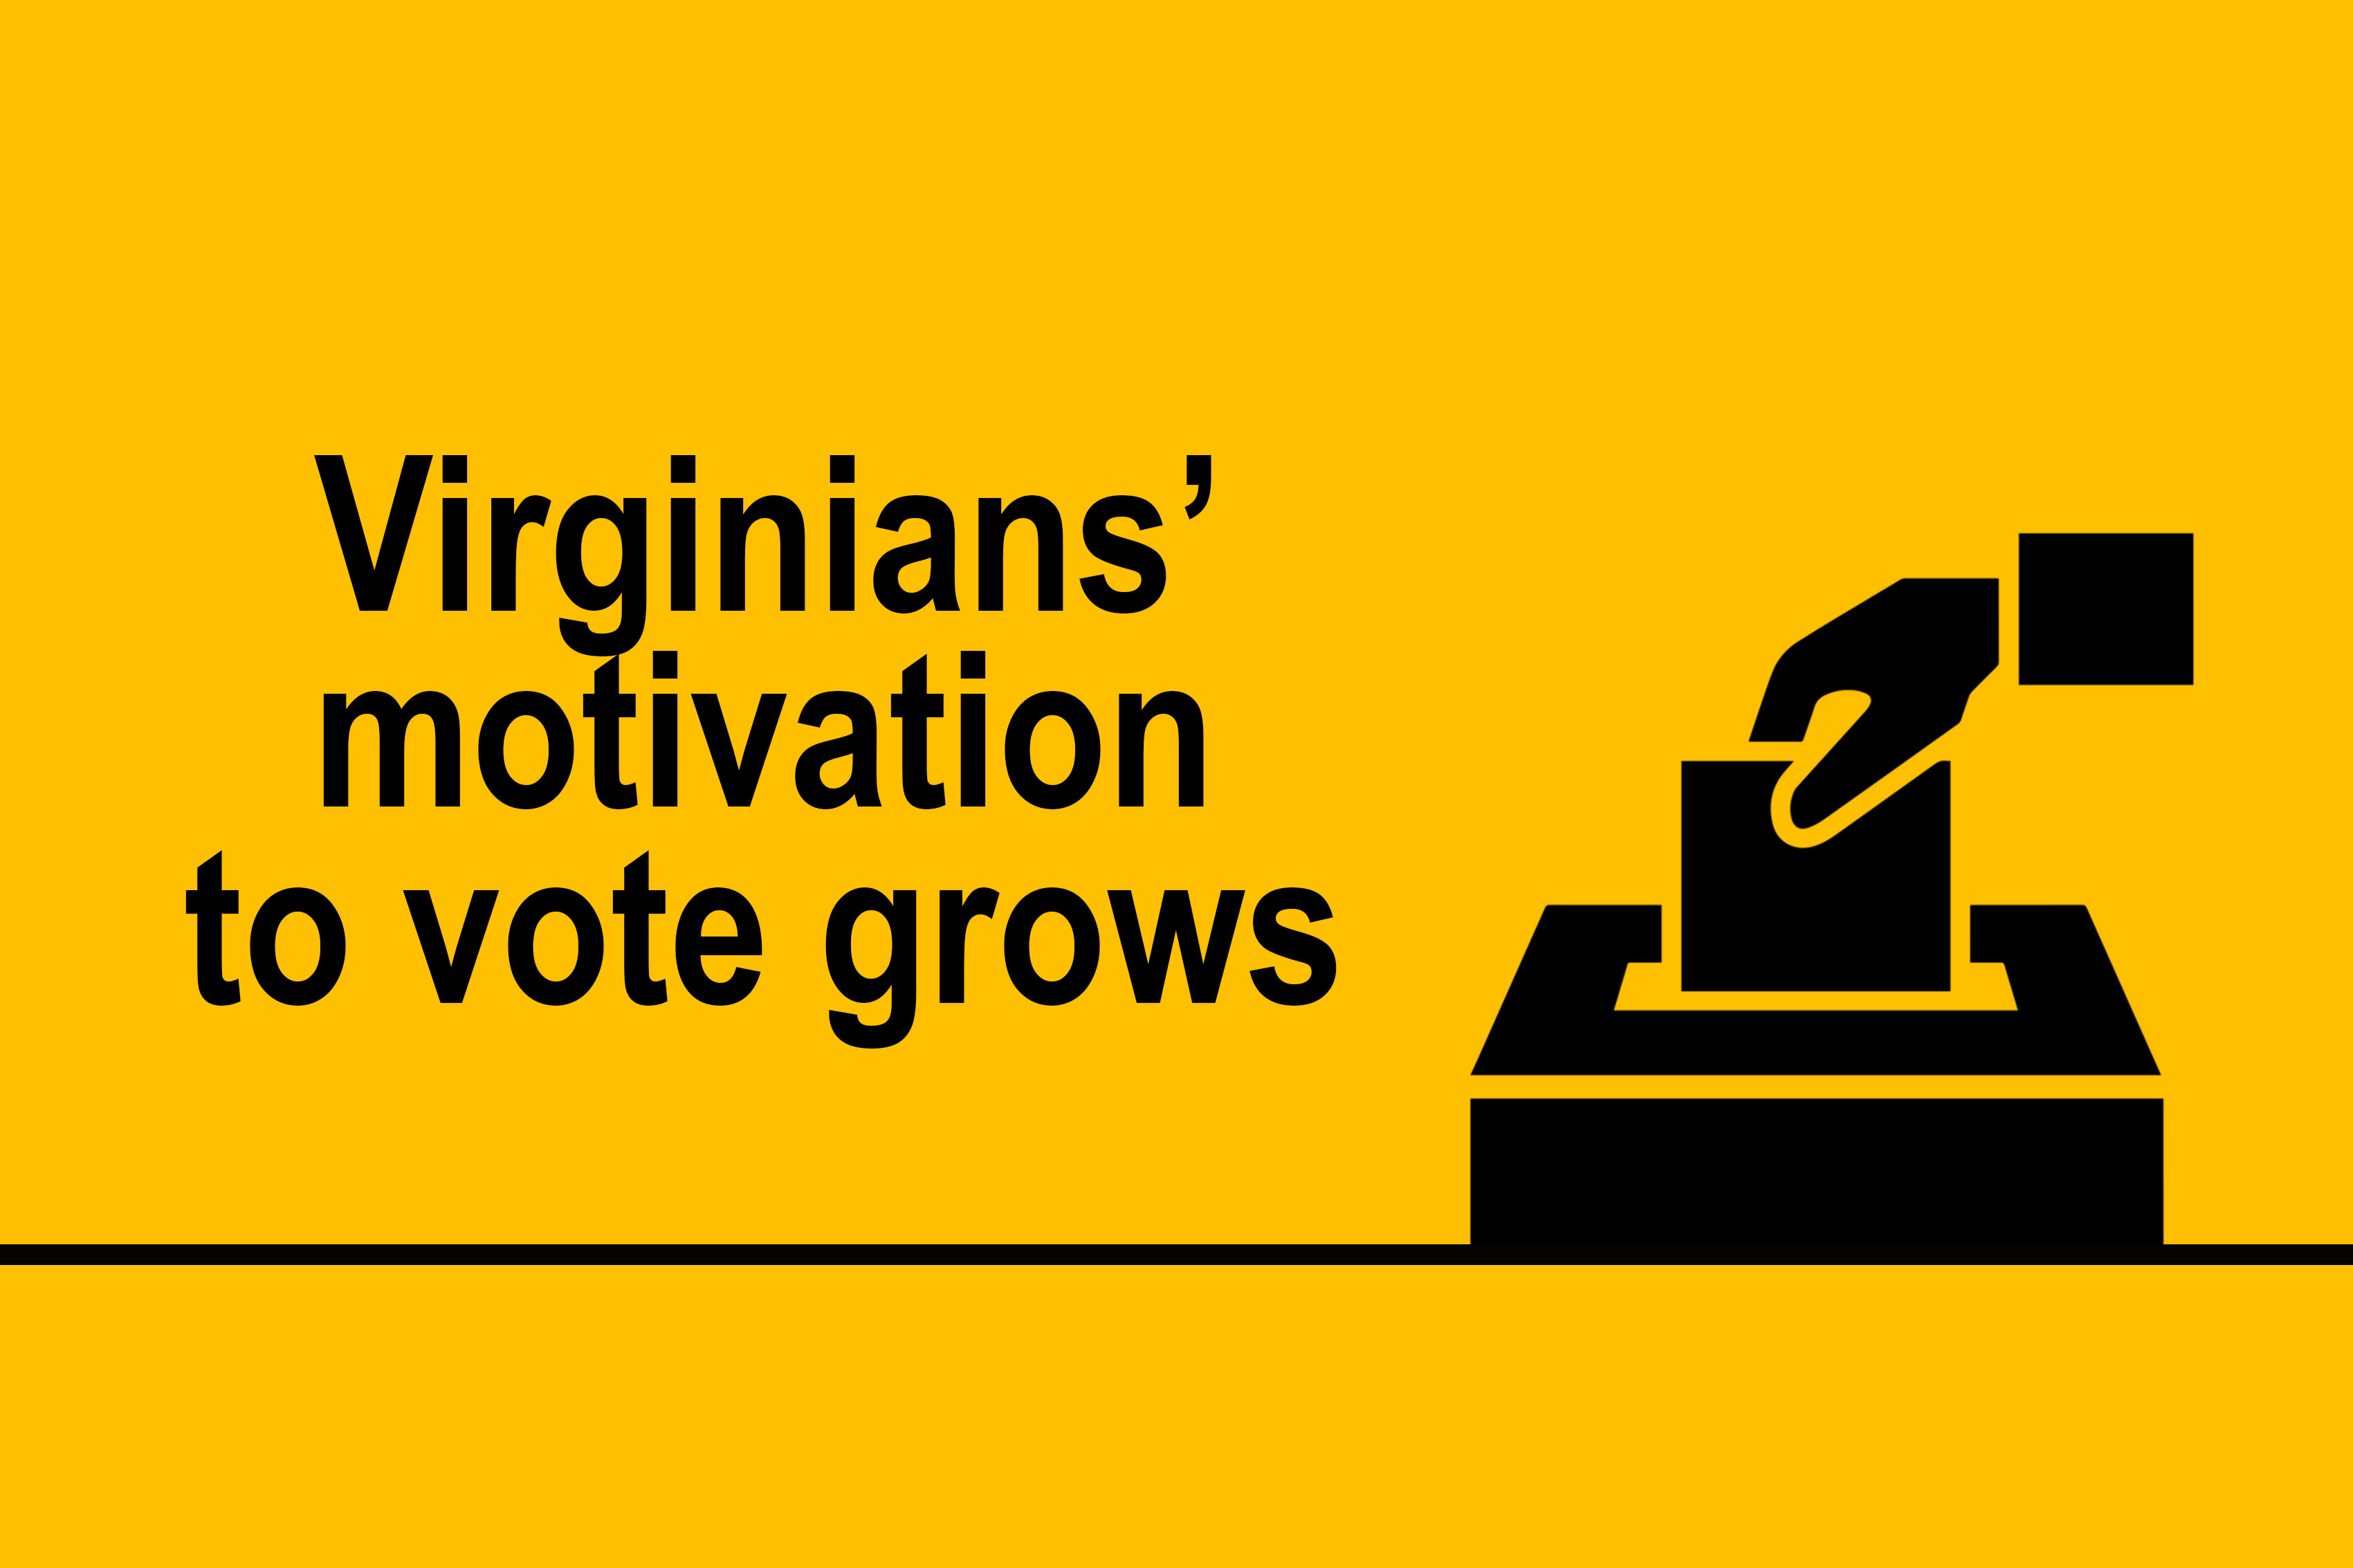 Against the backdrop of last month’s election that gave Democrats control of Virginia’s General Assembly and amid the ongoing process of impeaching President Donald Trump, Virginians are increasingly motivated to vote, according to statewide poll conducted by the Center for Public Policy at the L. Douglas Wilder School of Government and Public Affairs at Virginia Commonwealth University.